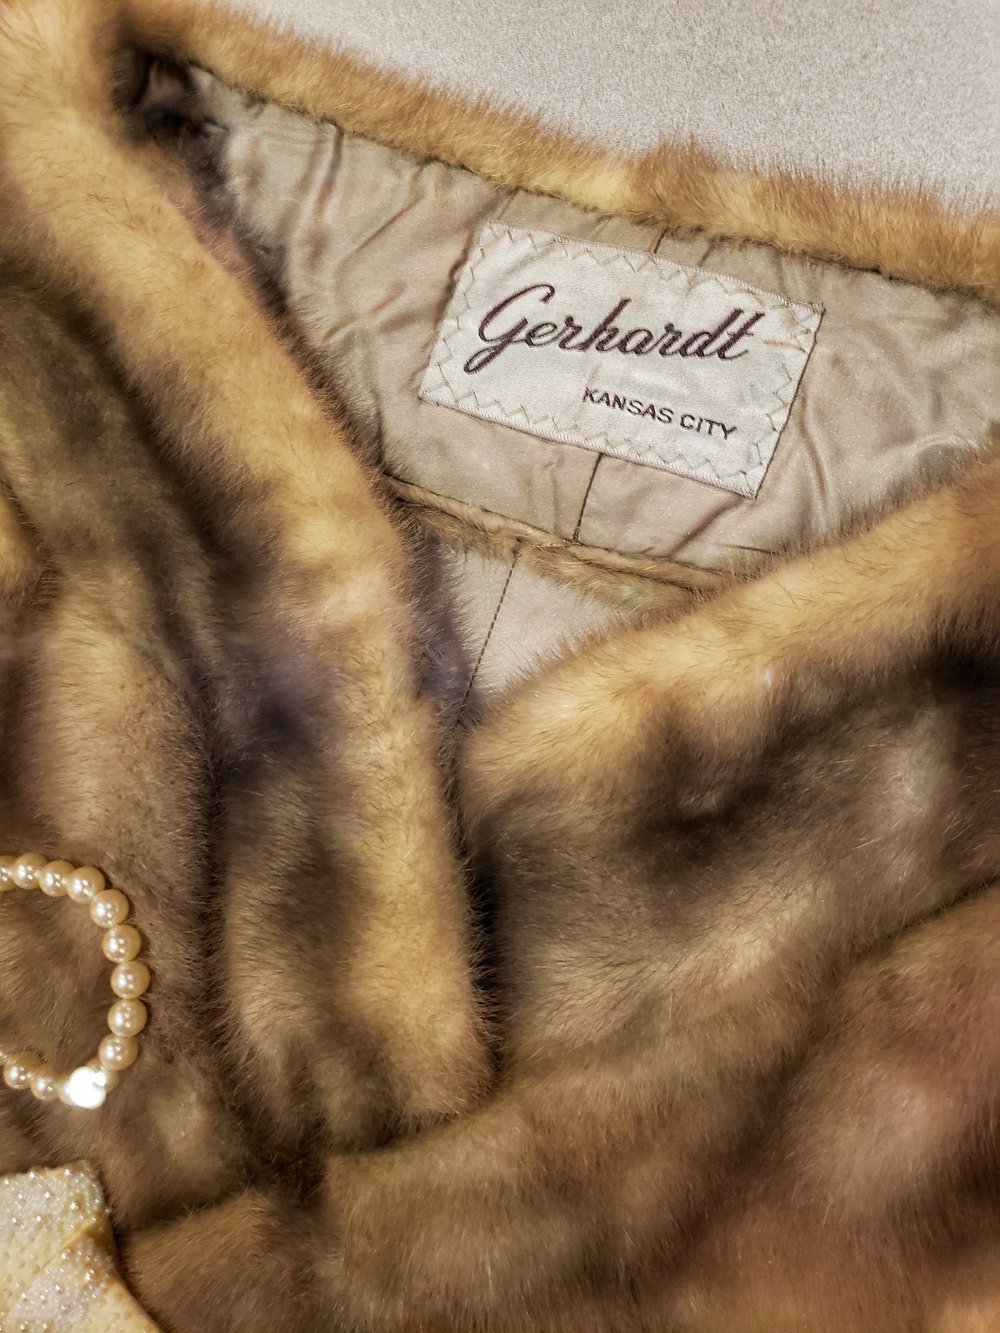  This fur stole was purchases at Gerhardt in Kansas City. A prominent department store in the 50s.  